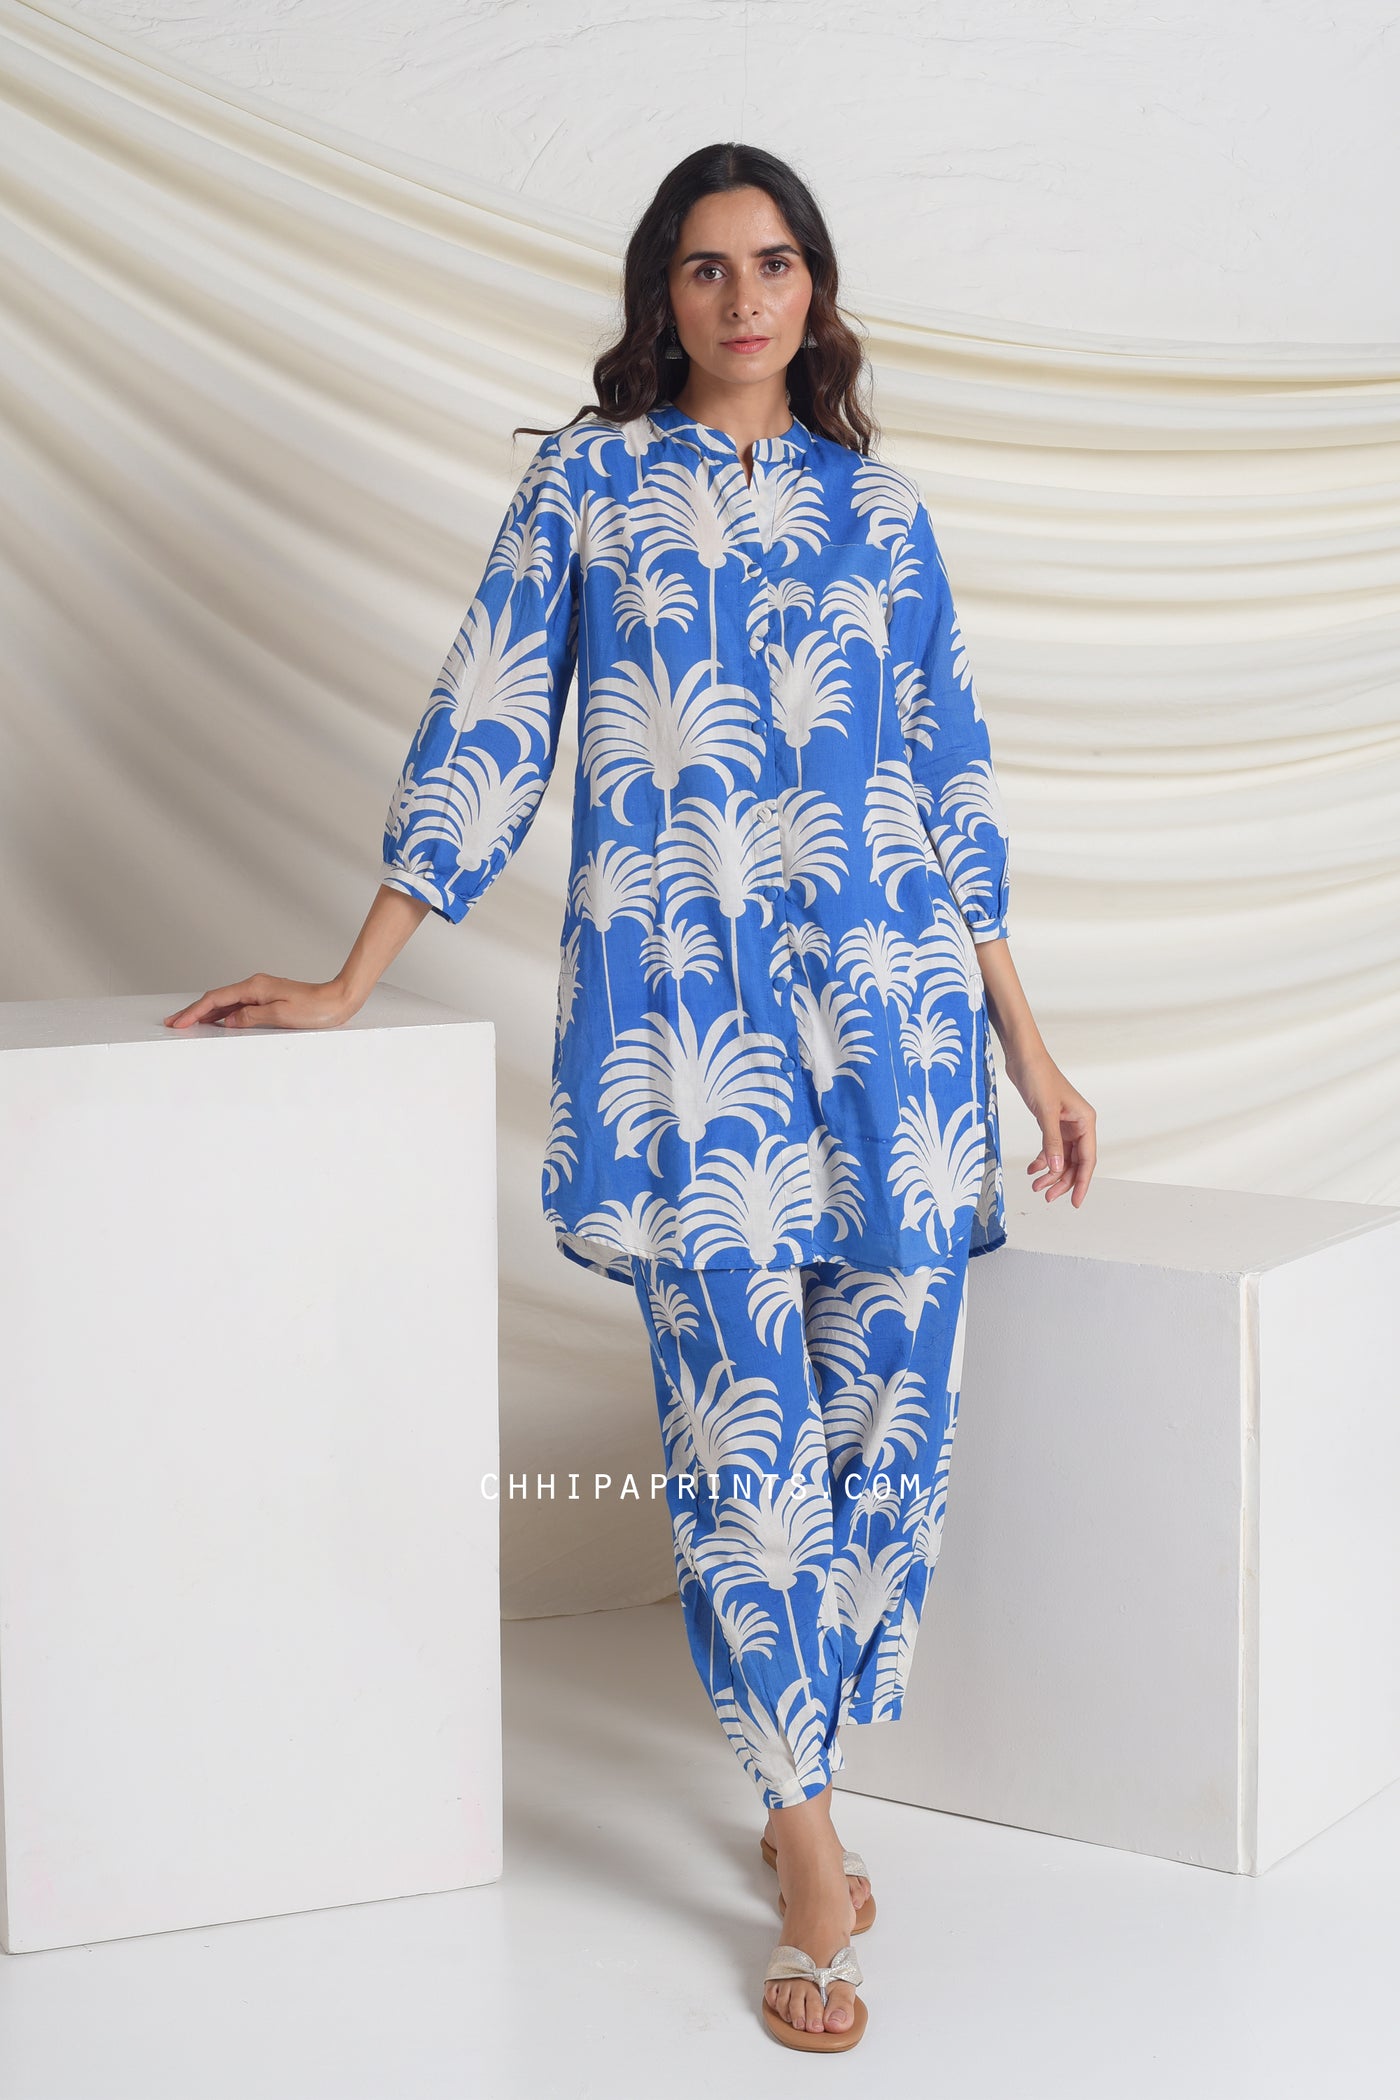 Cotton Hand Printed Palm Tree Co Ord Set in Royal Blue